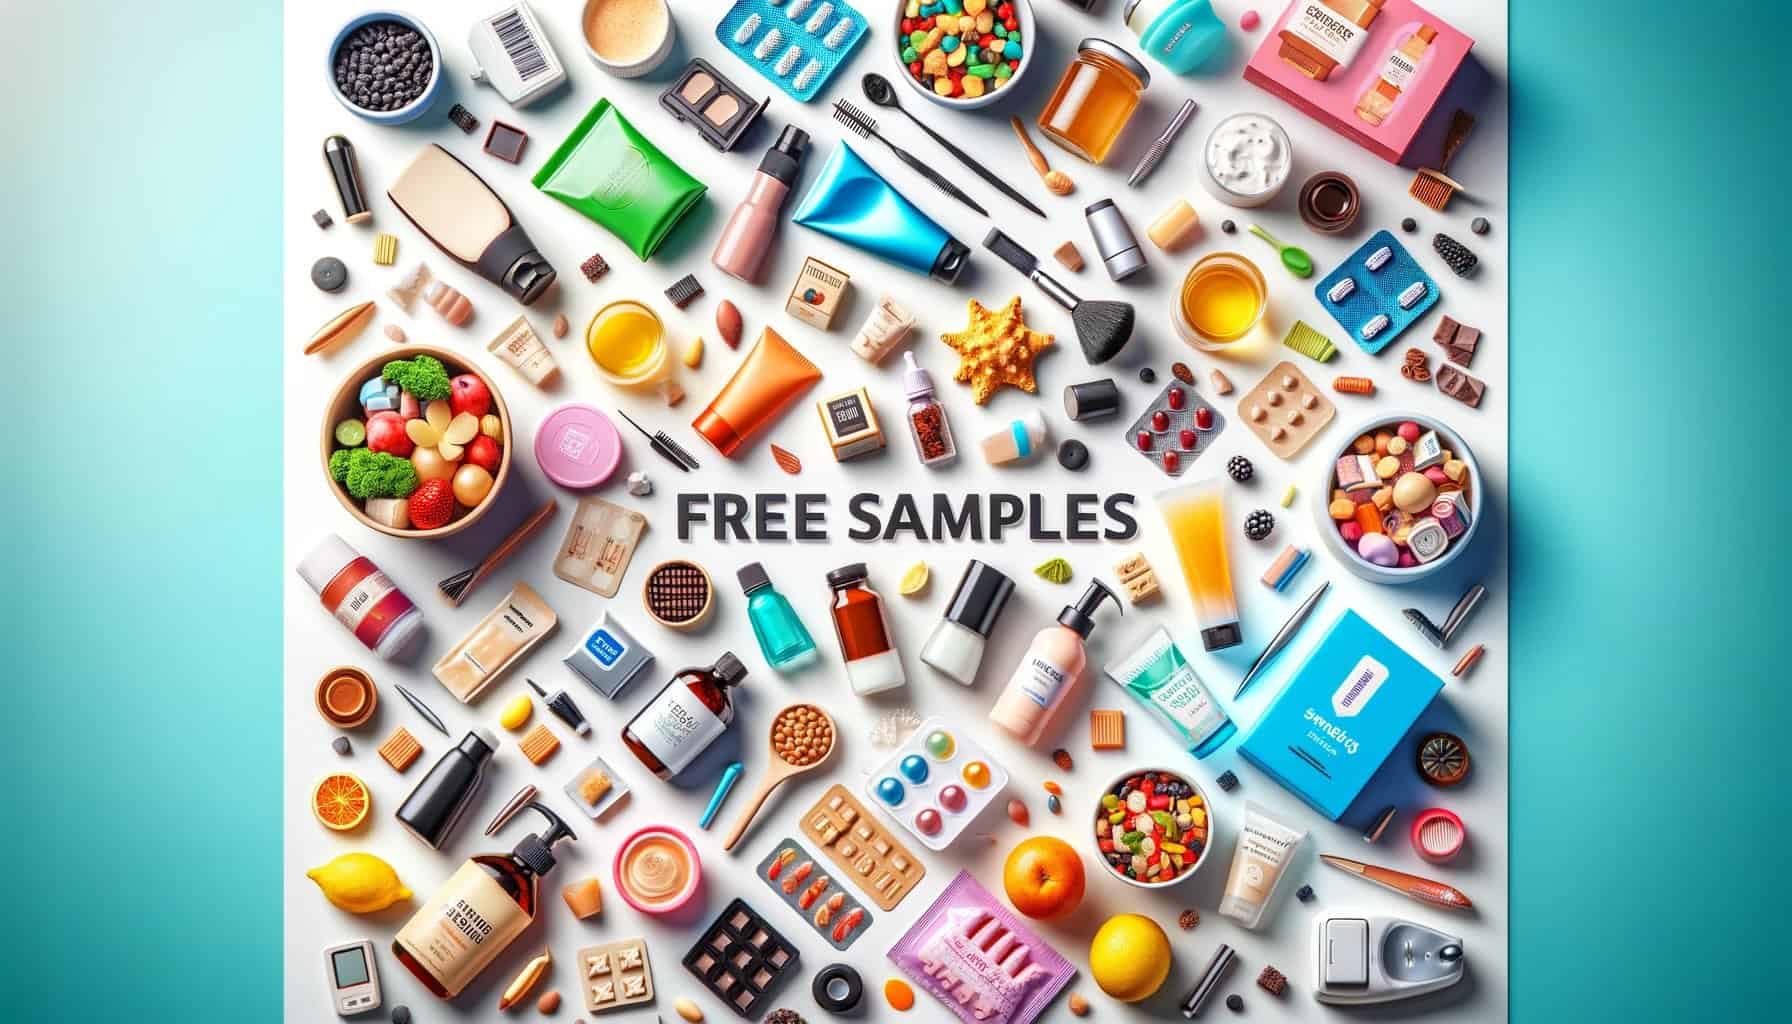 Free samples and prizes